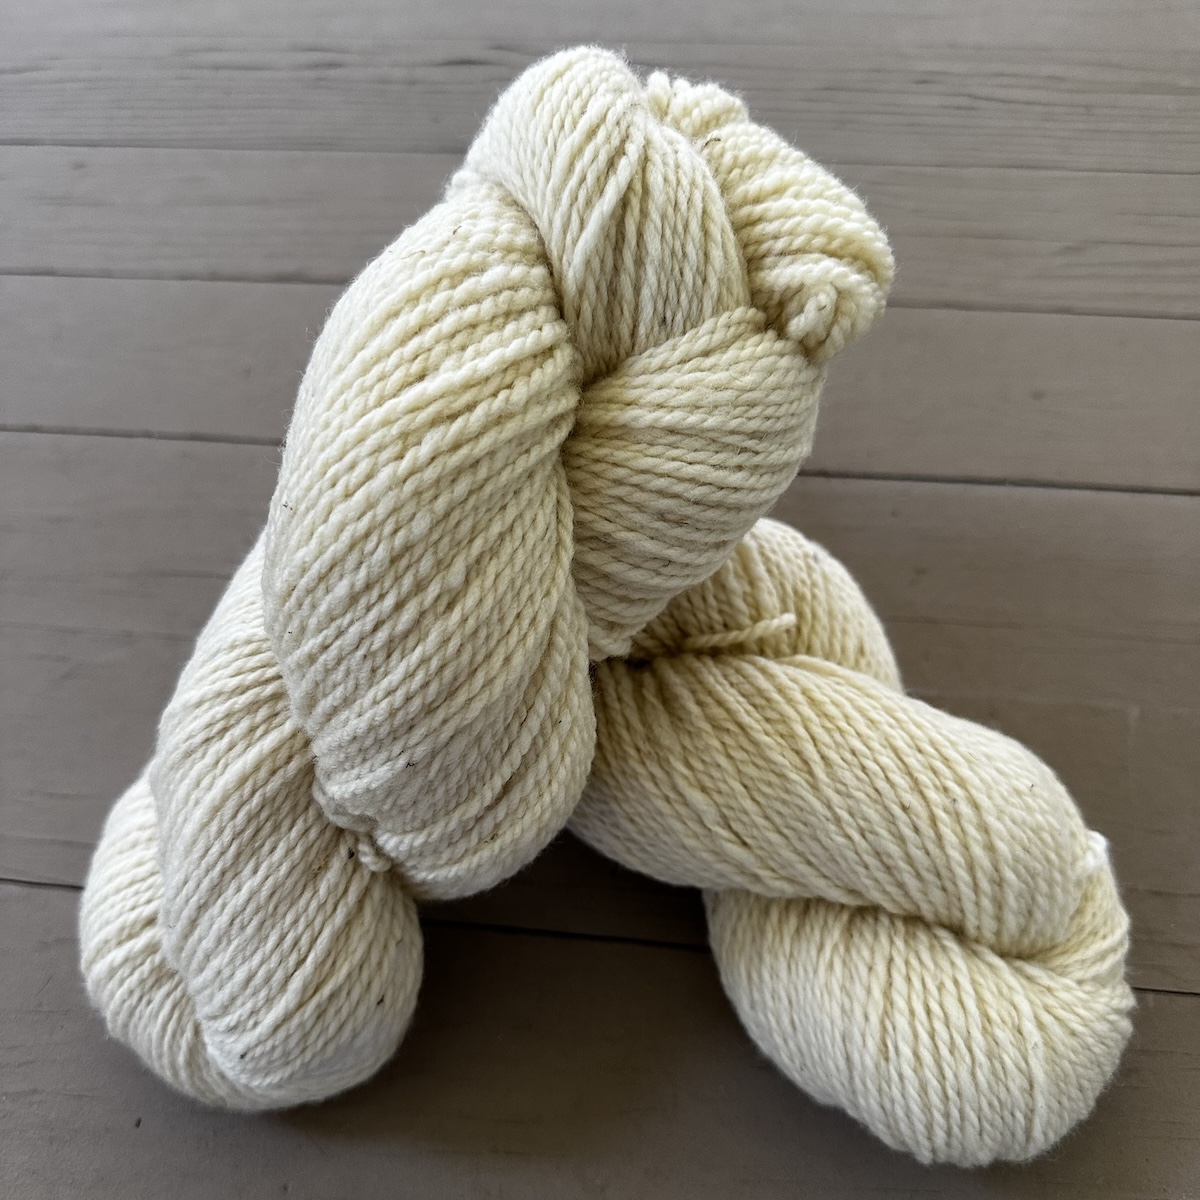 Twisted Oaks, 100% Corriedale Wool Yarn, undyed 2 ply Worsted Weight